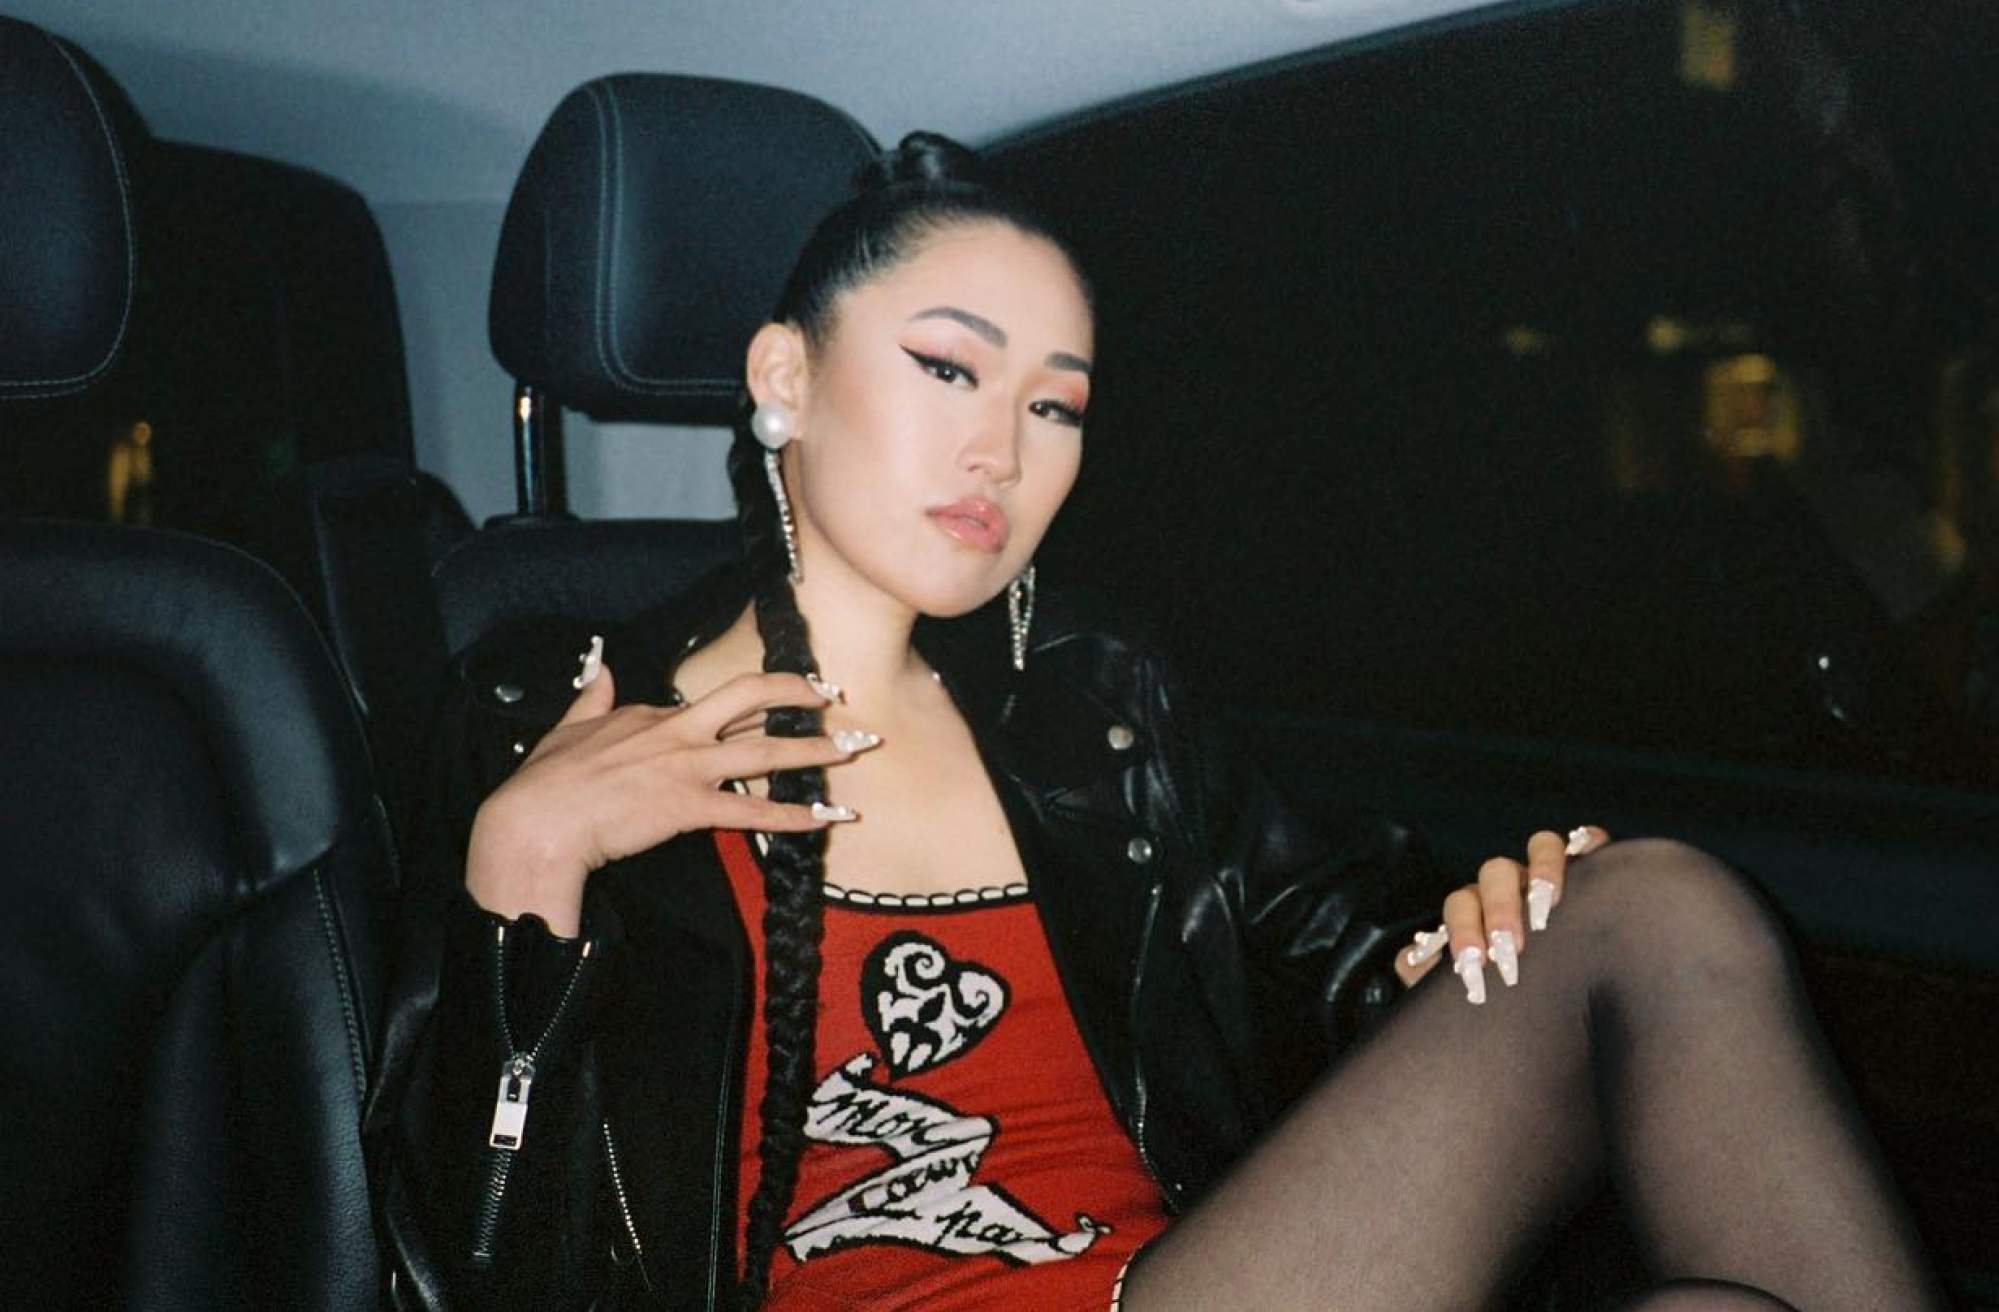 Interview: Rui Zhou on her gender-fluidity and her label RUI